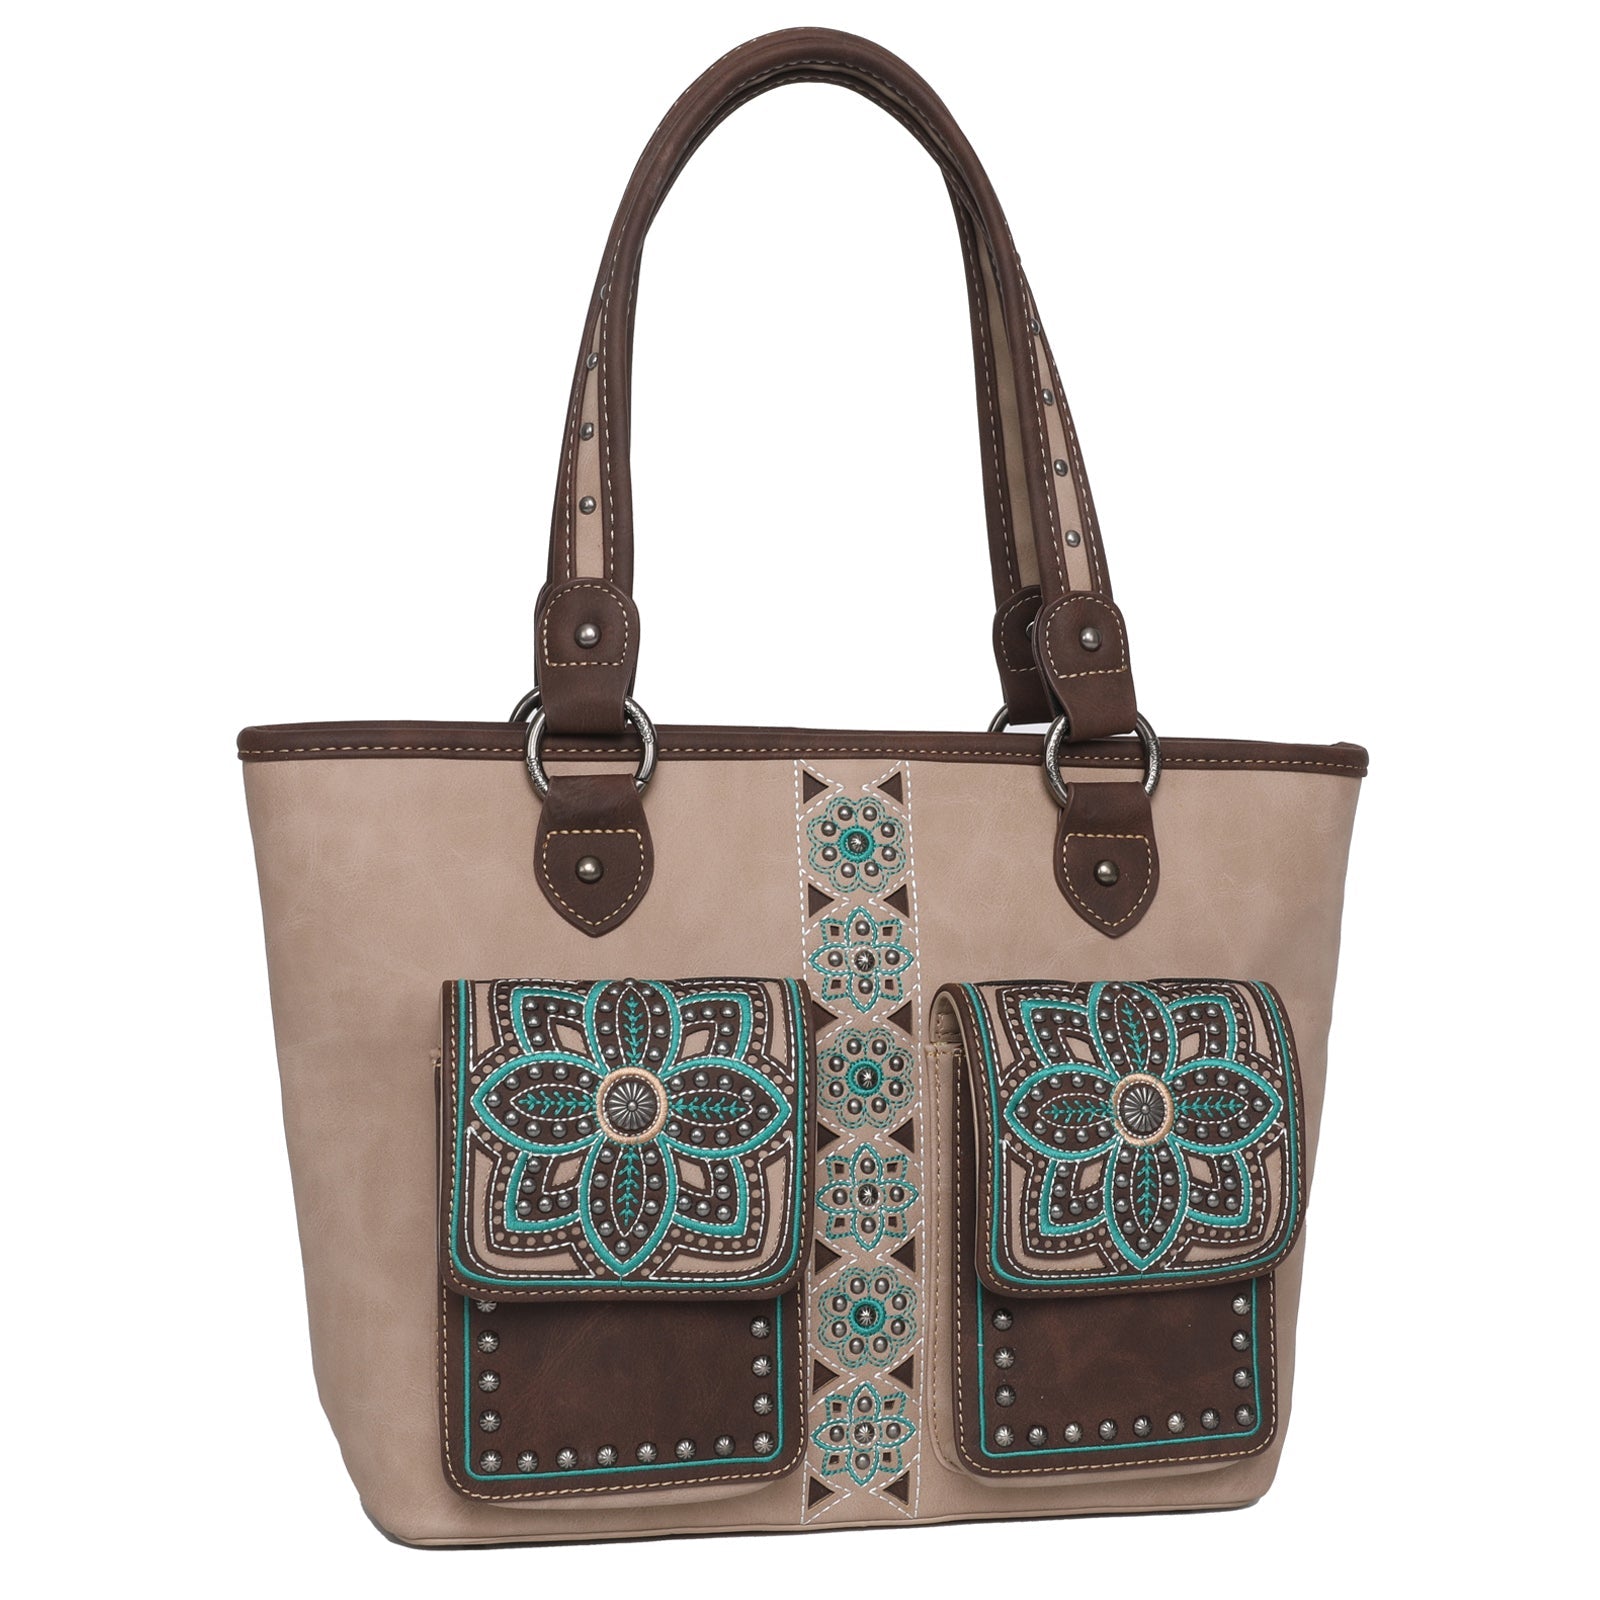 Montana West Floral Embroidered Concealed Carry Tote